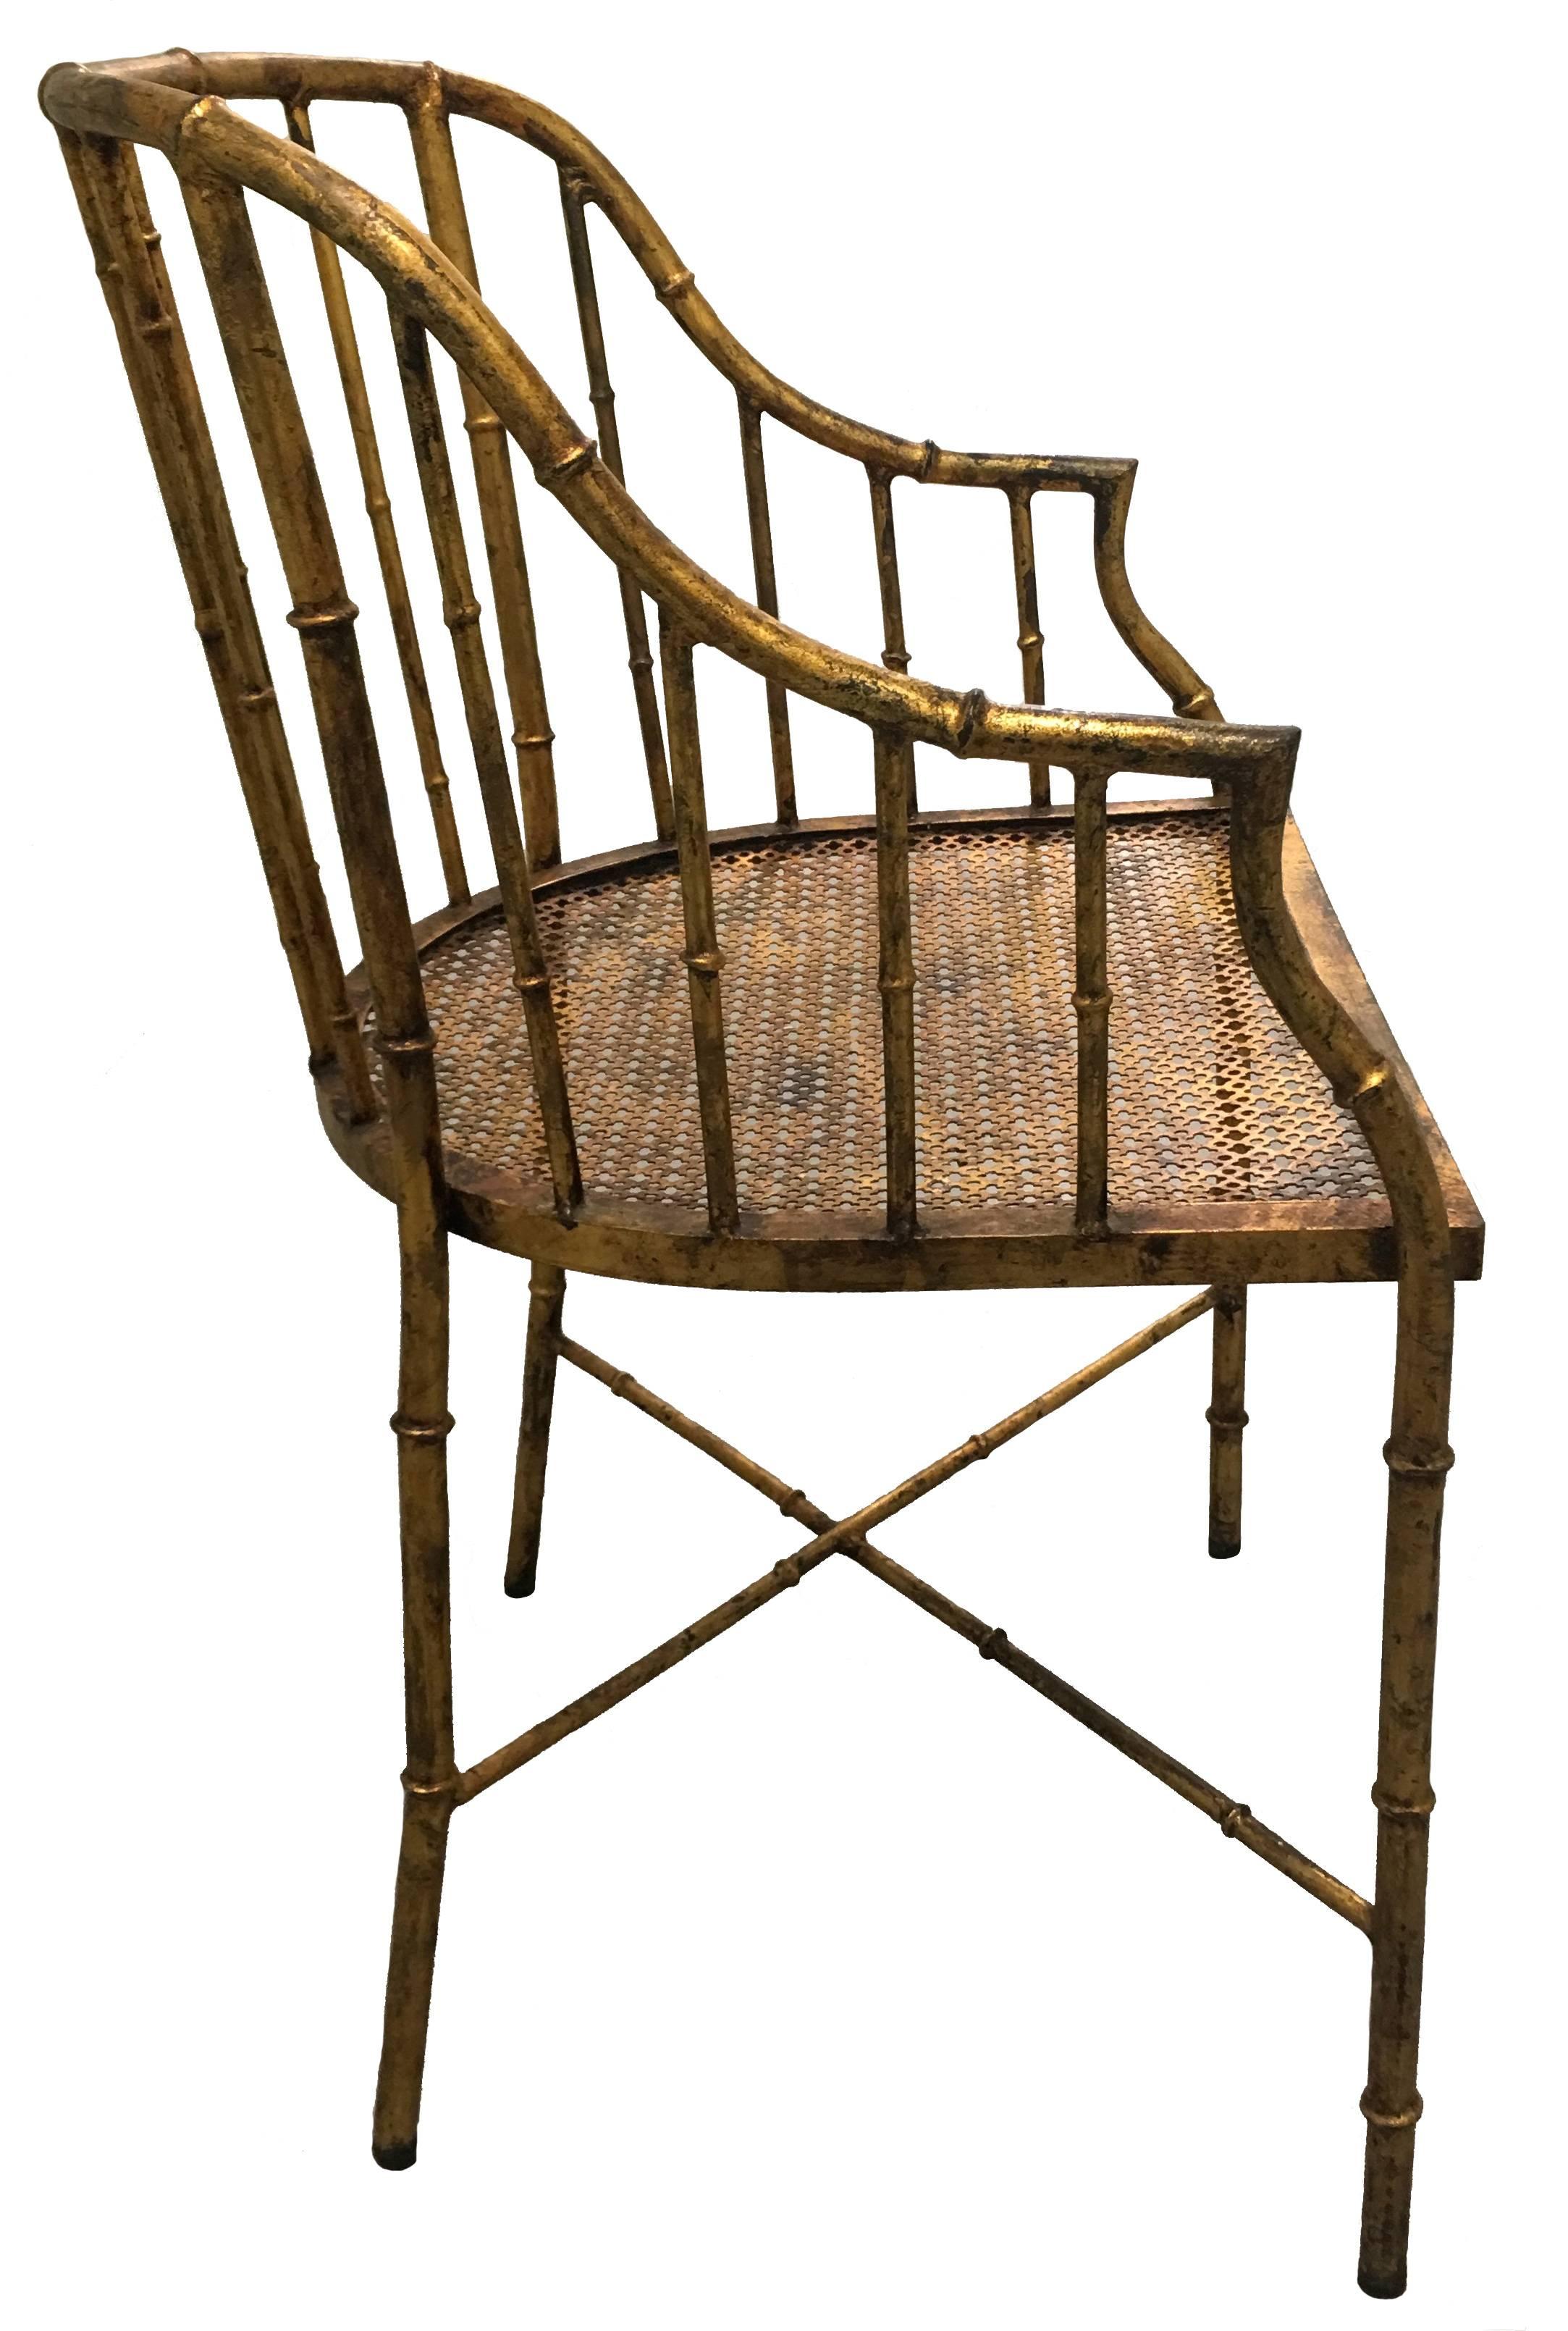 Chinoiserie Burnished Gilt Metal Bamboo Armchair by La Barge